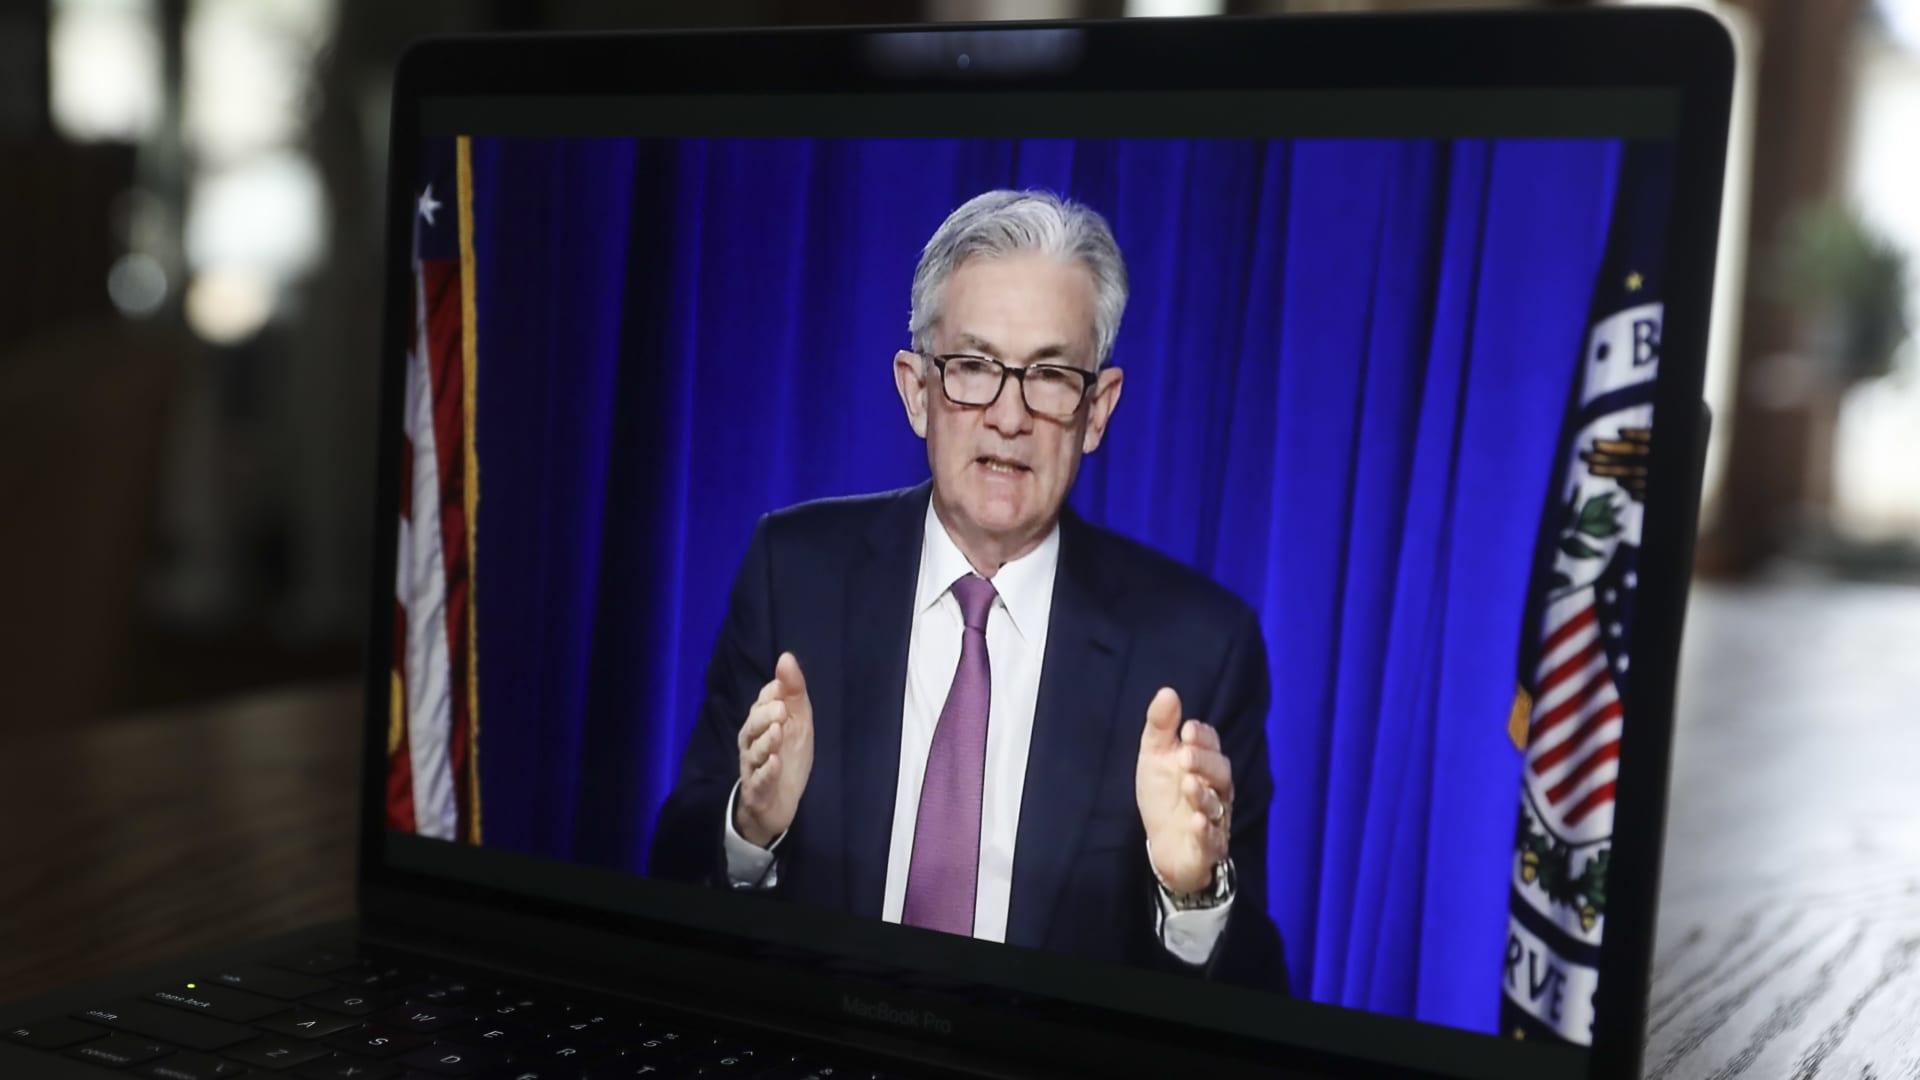 Jerome Powell, chairman of the U.S. Federal Reserve, speaks during a virtual news conference in Tiskilwa, Illinois, U.S., on Wednesday, Dec. 16, 2020.